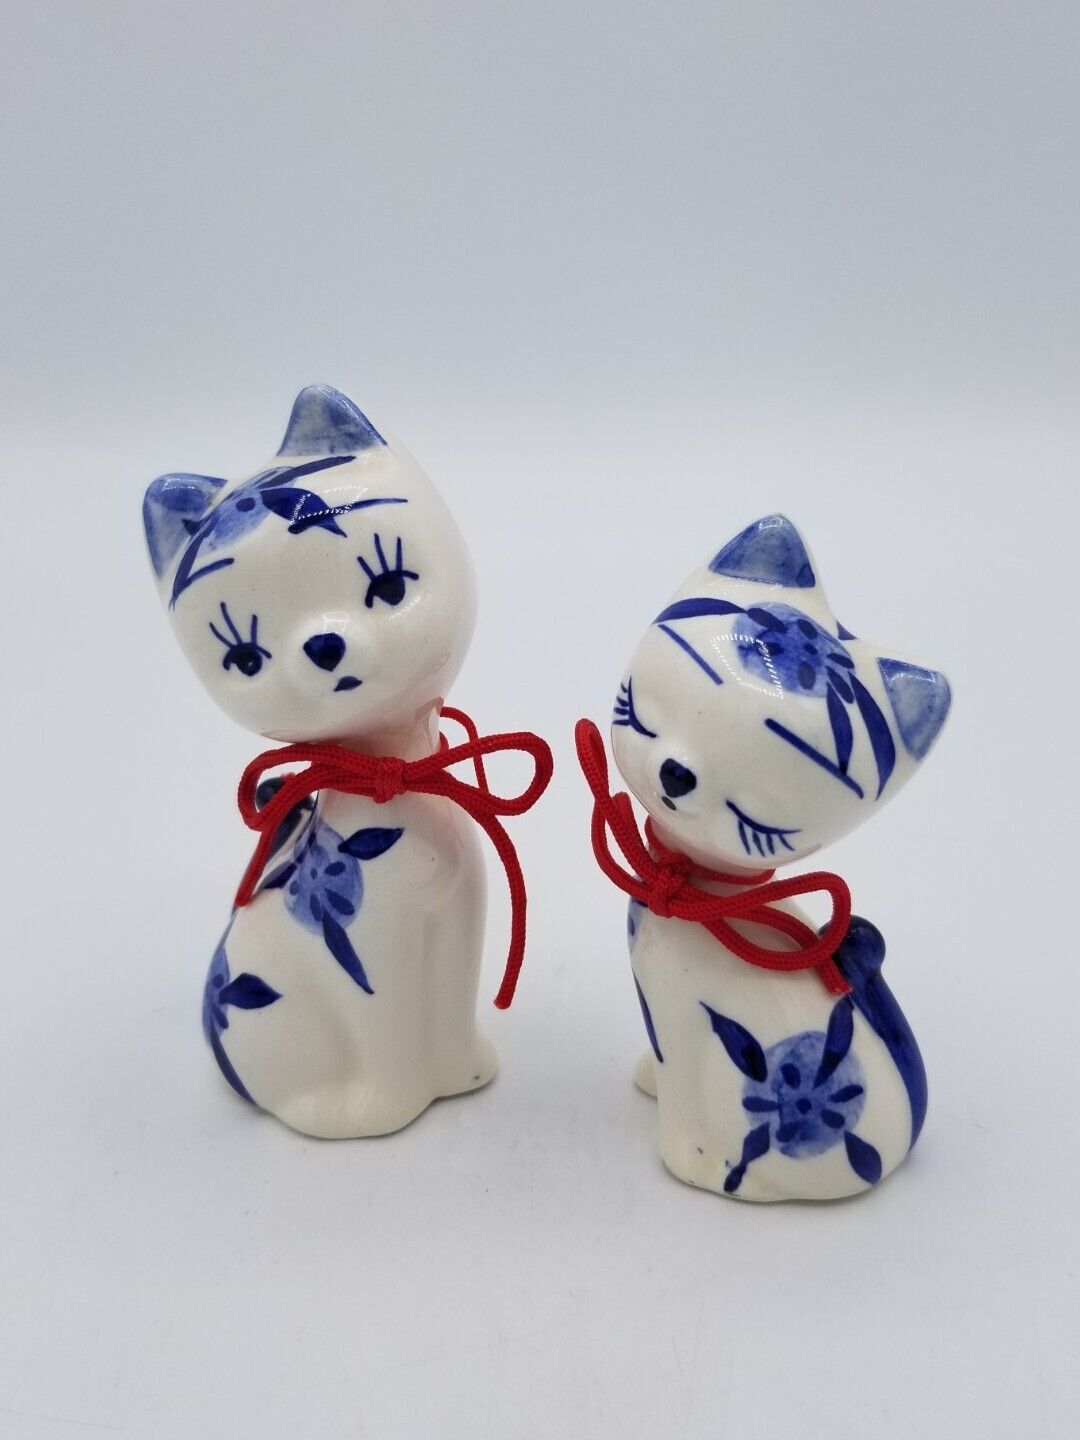 Vintage Blue Delft Pair of Kitty Cats Figurines Handpainted By Elesva